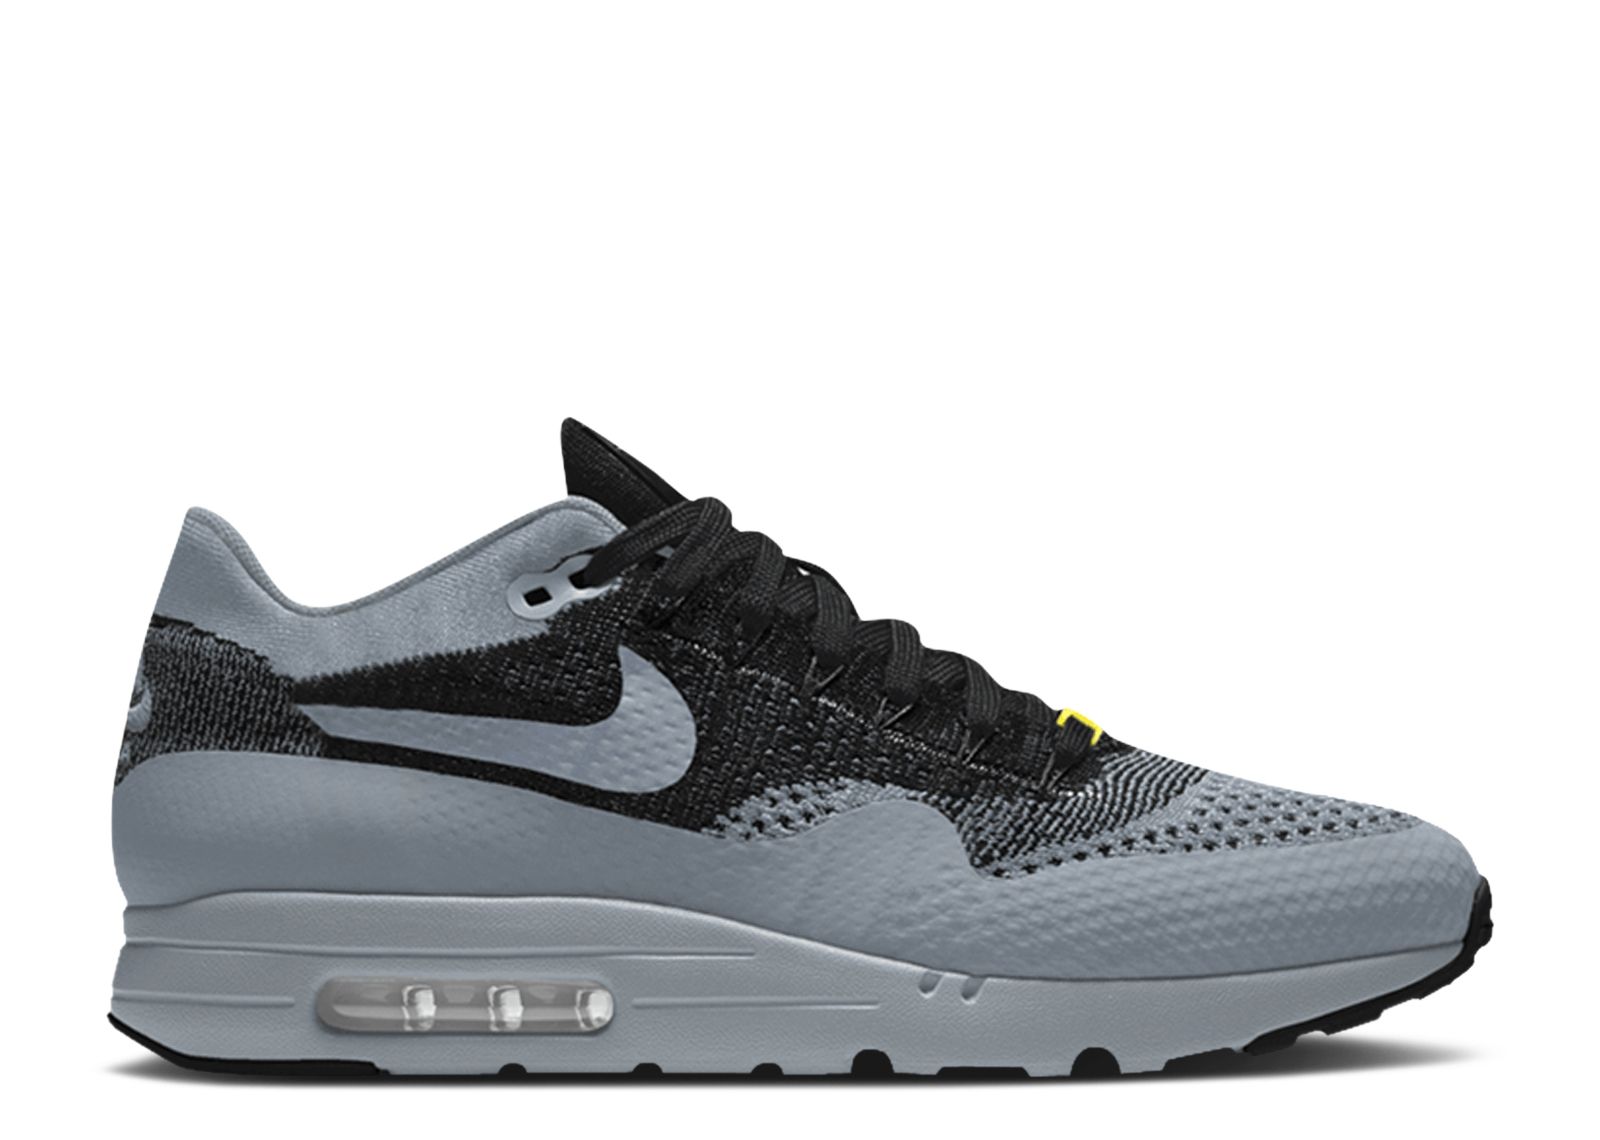 The Nike Air Max 90 Batman is as awesome as a night out in Gotham